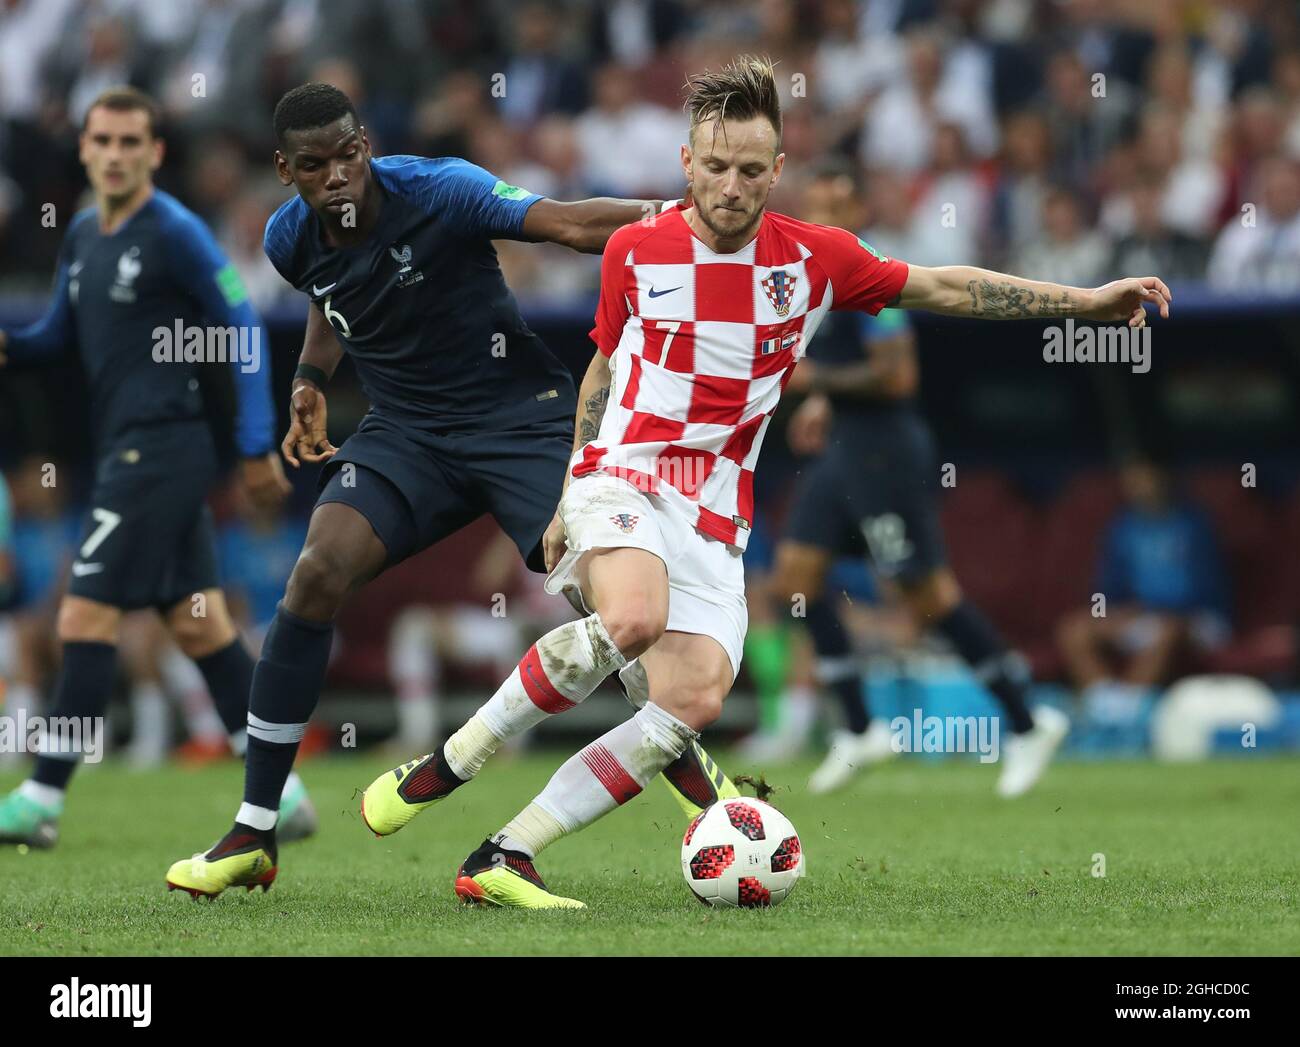 Paul Pogba of France tackles Ivan Rakitic of Croatia during the FIFA World Cup 2018 Final at the Luzhniki Stadium, Moscow. Picture date 15th July 2018. Picture credit should read: David Klein/Sportimage via PA Images Stock Photo